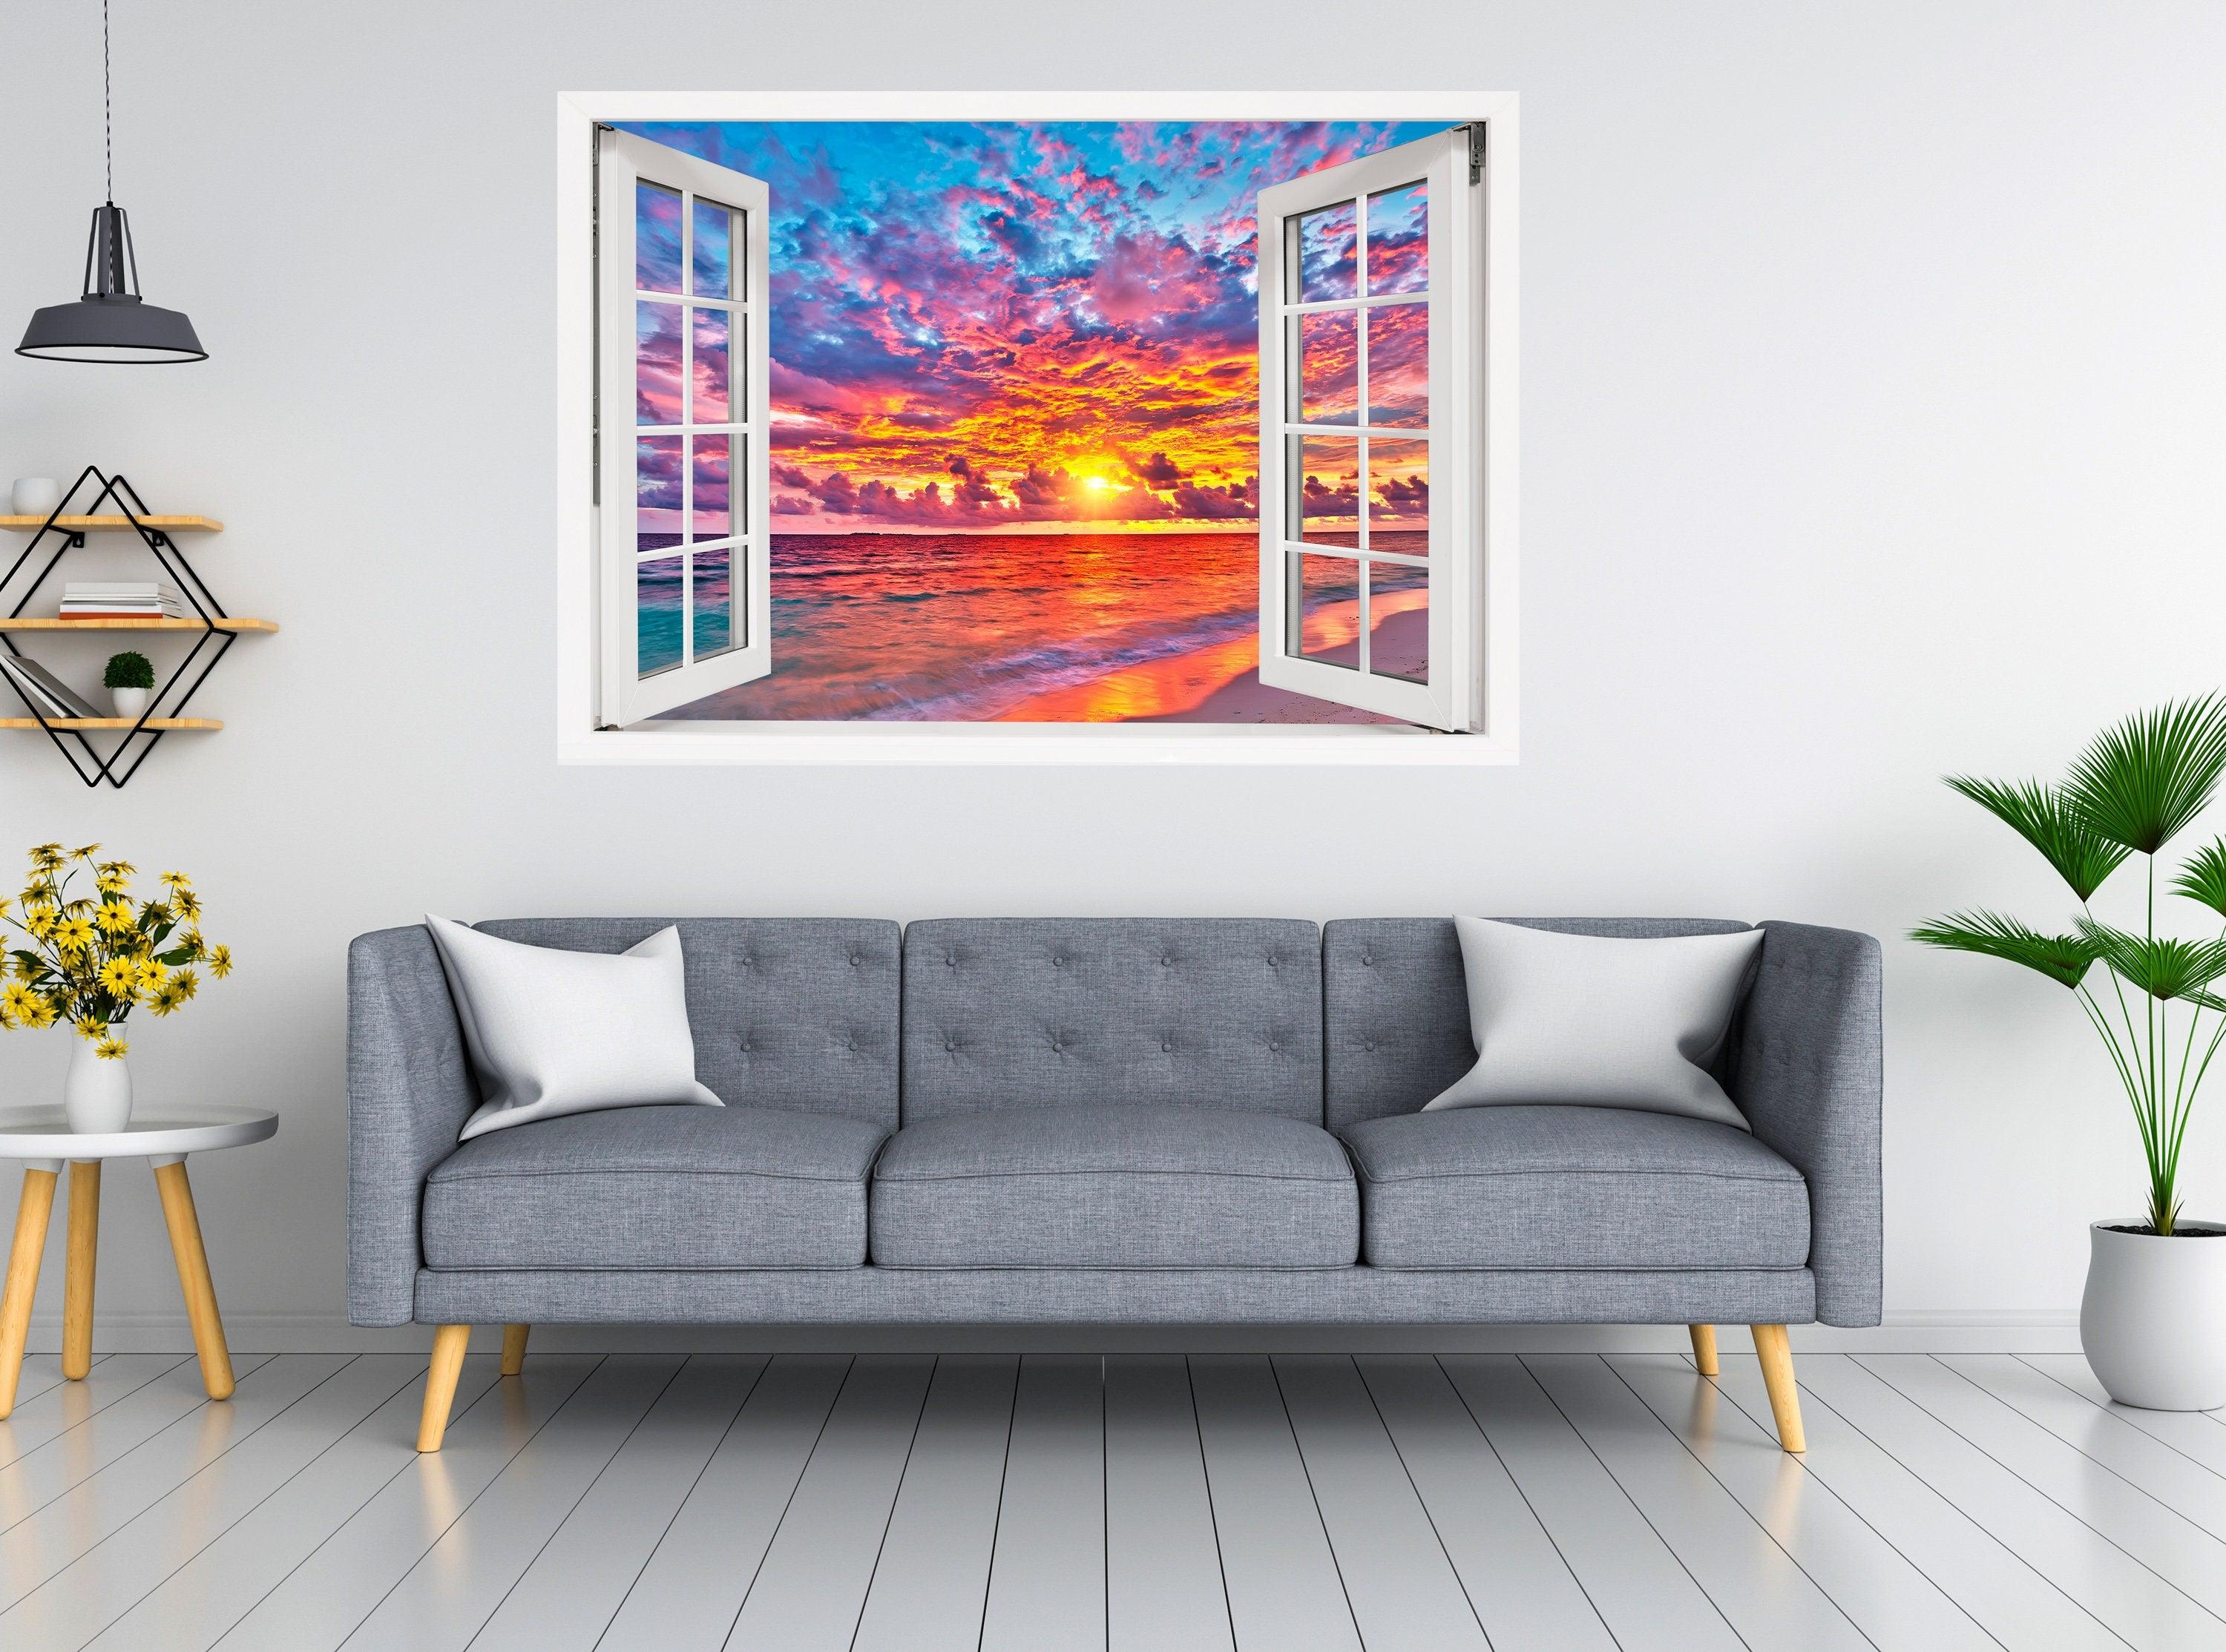 Window Scape Vibrant Beach Sunset #15b Window Decal Sticker Sunset Lake Removable Fabric Window Frame Office Bedroom 3D